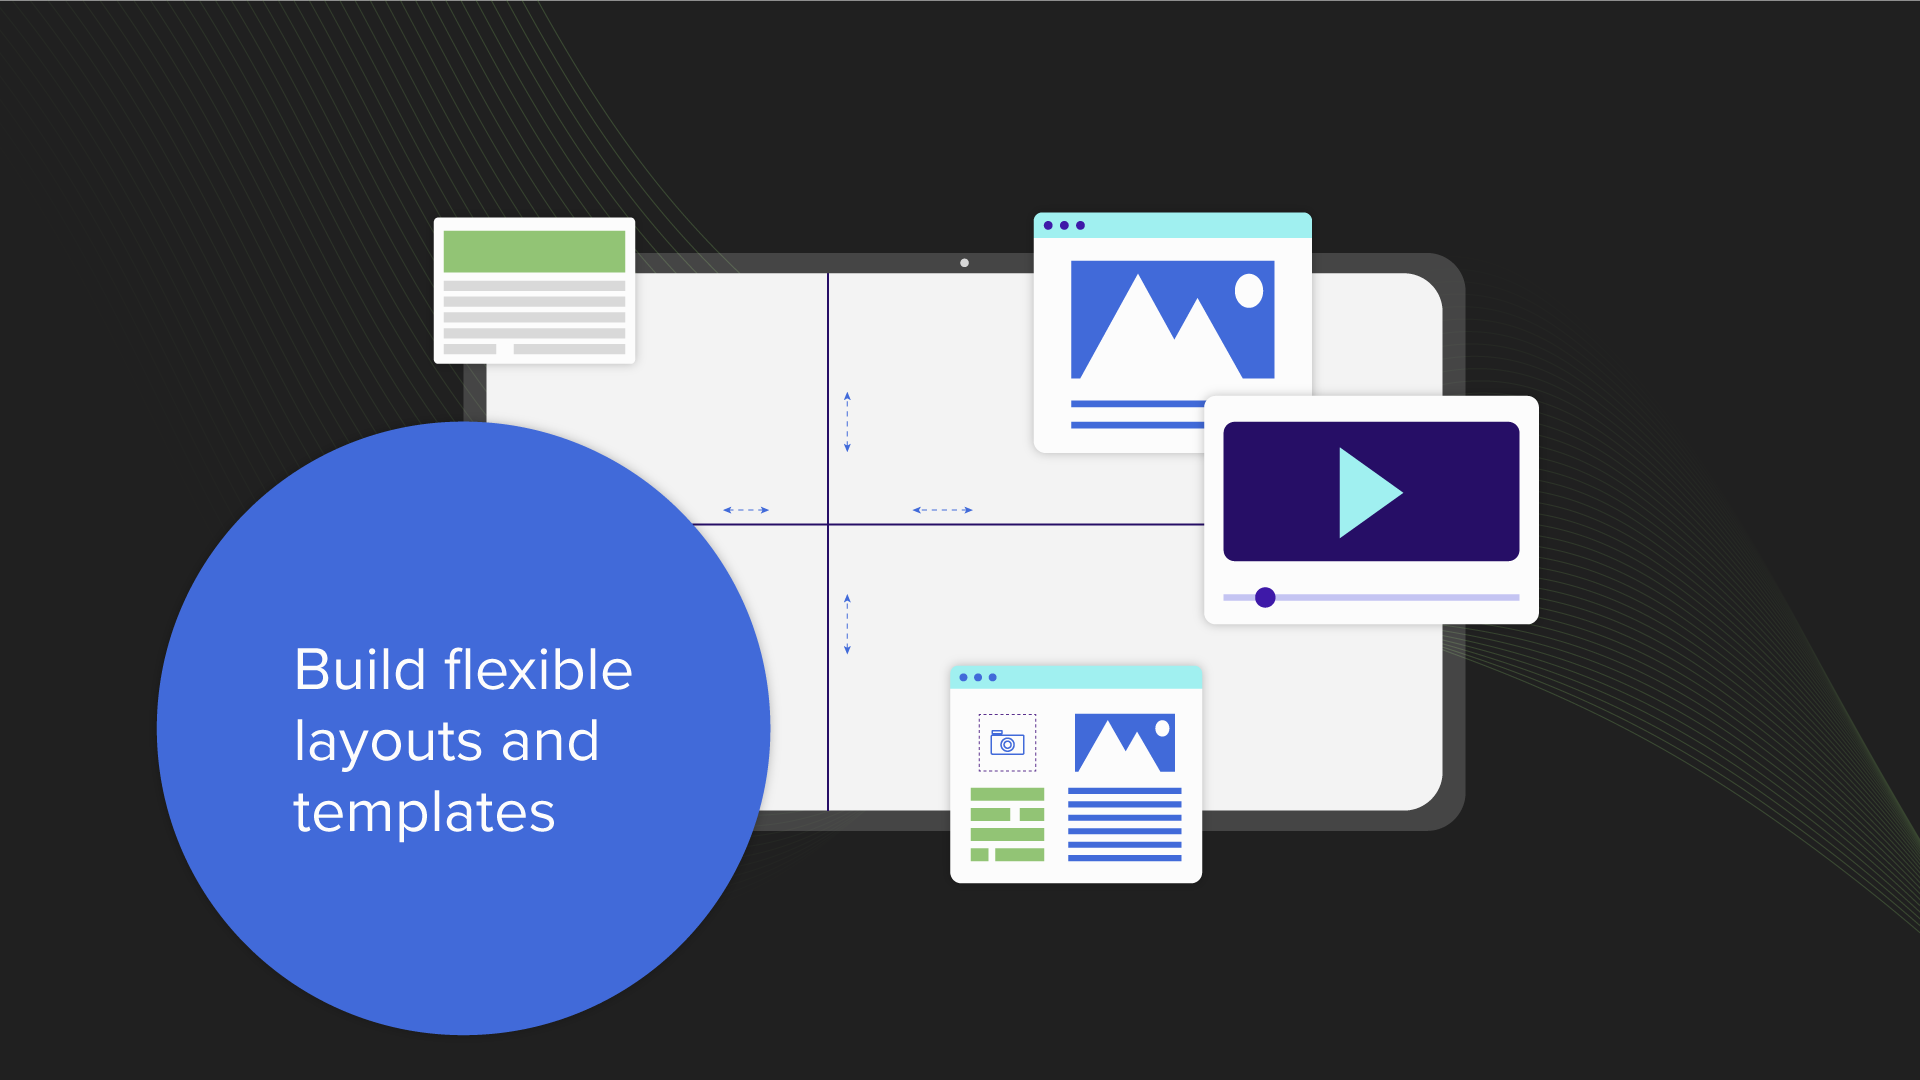 Build flexible layouts and templates